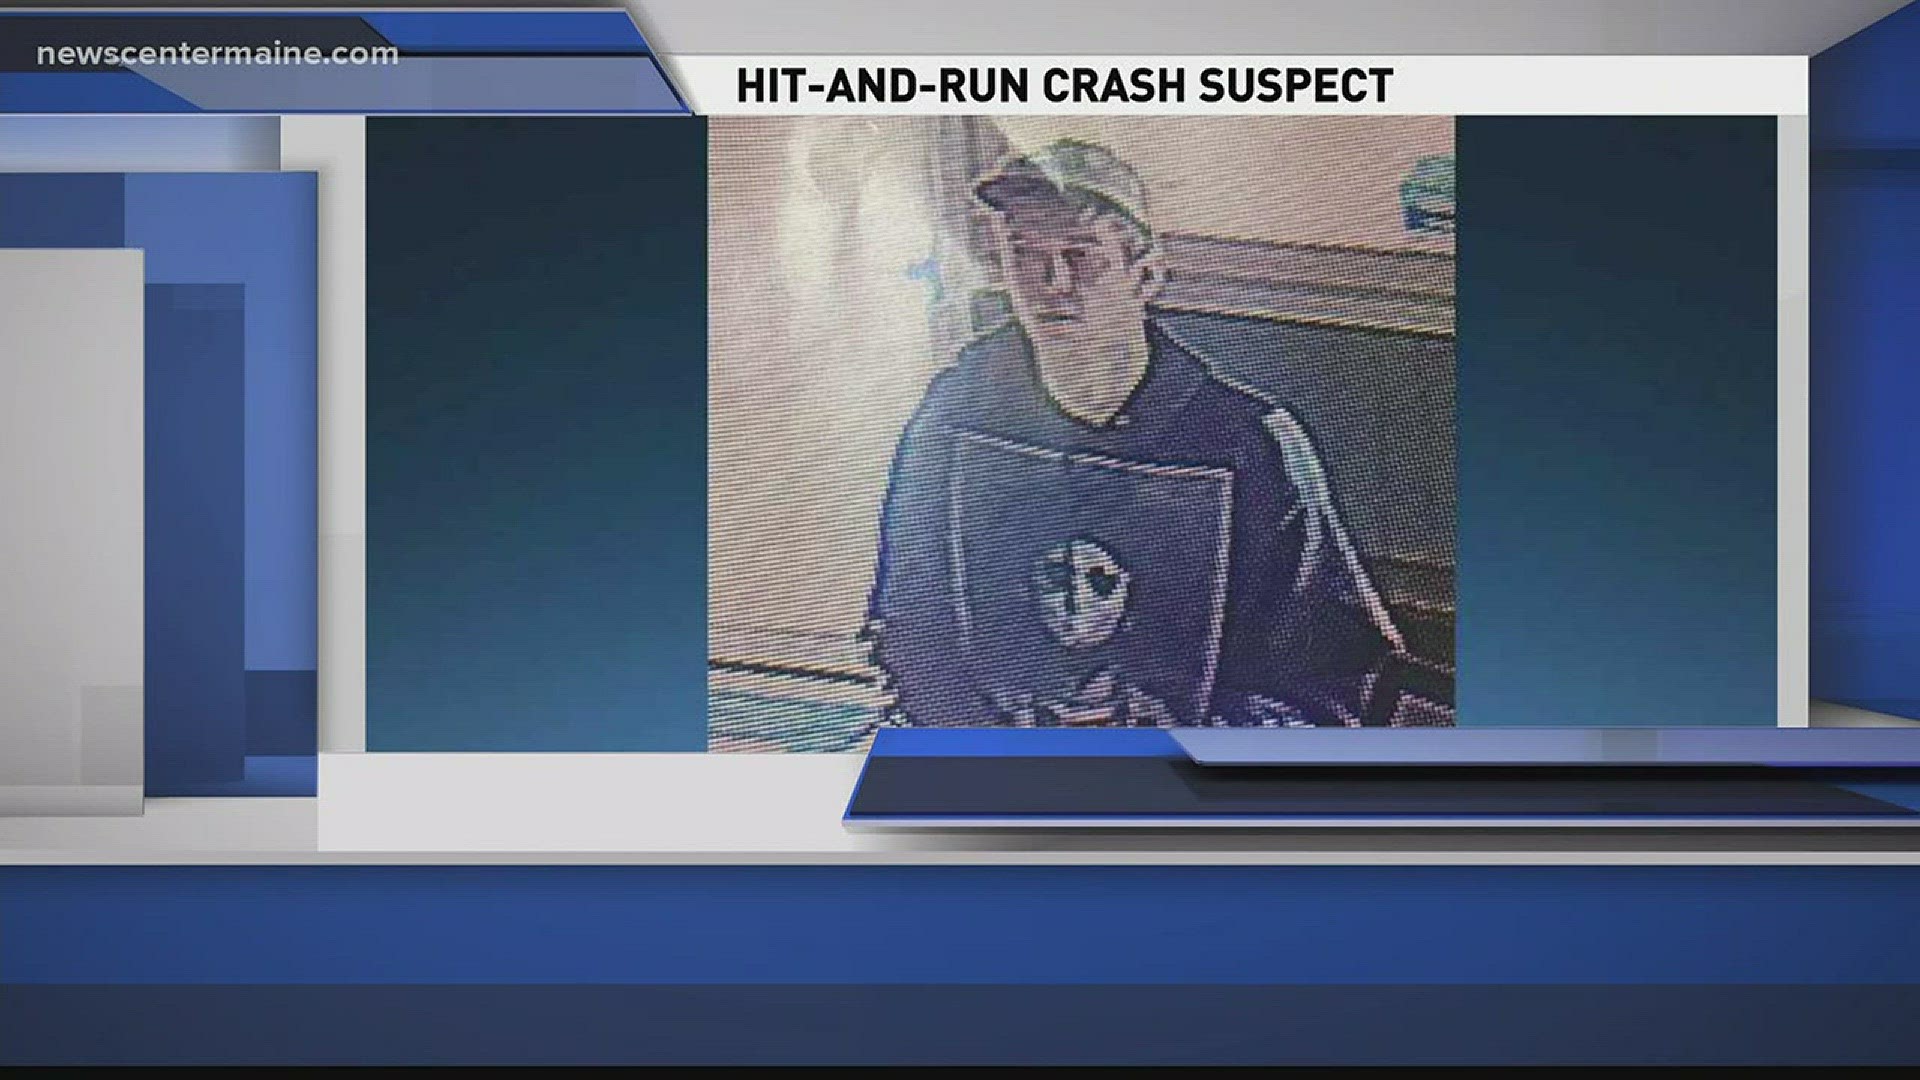 Police Looking for Hit-and-Run Crash Suspect